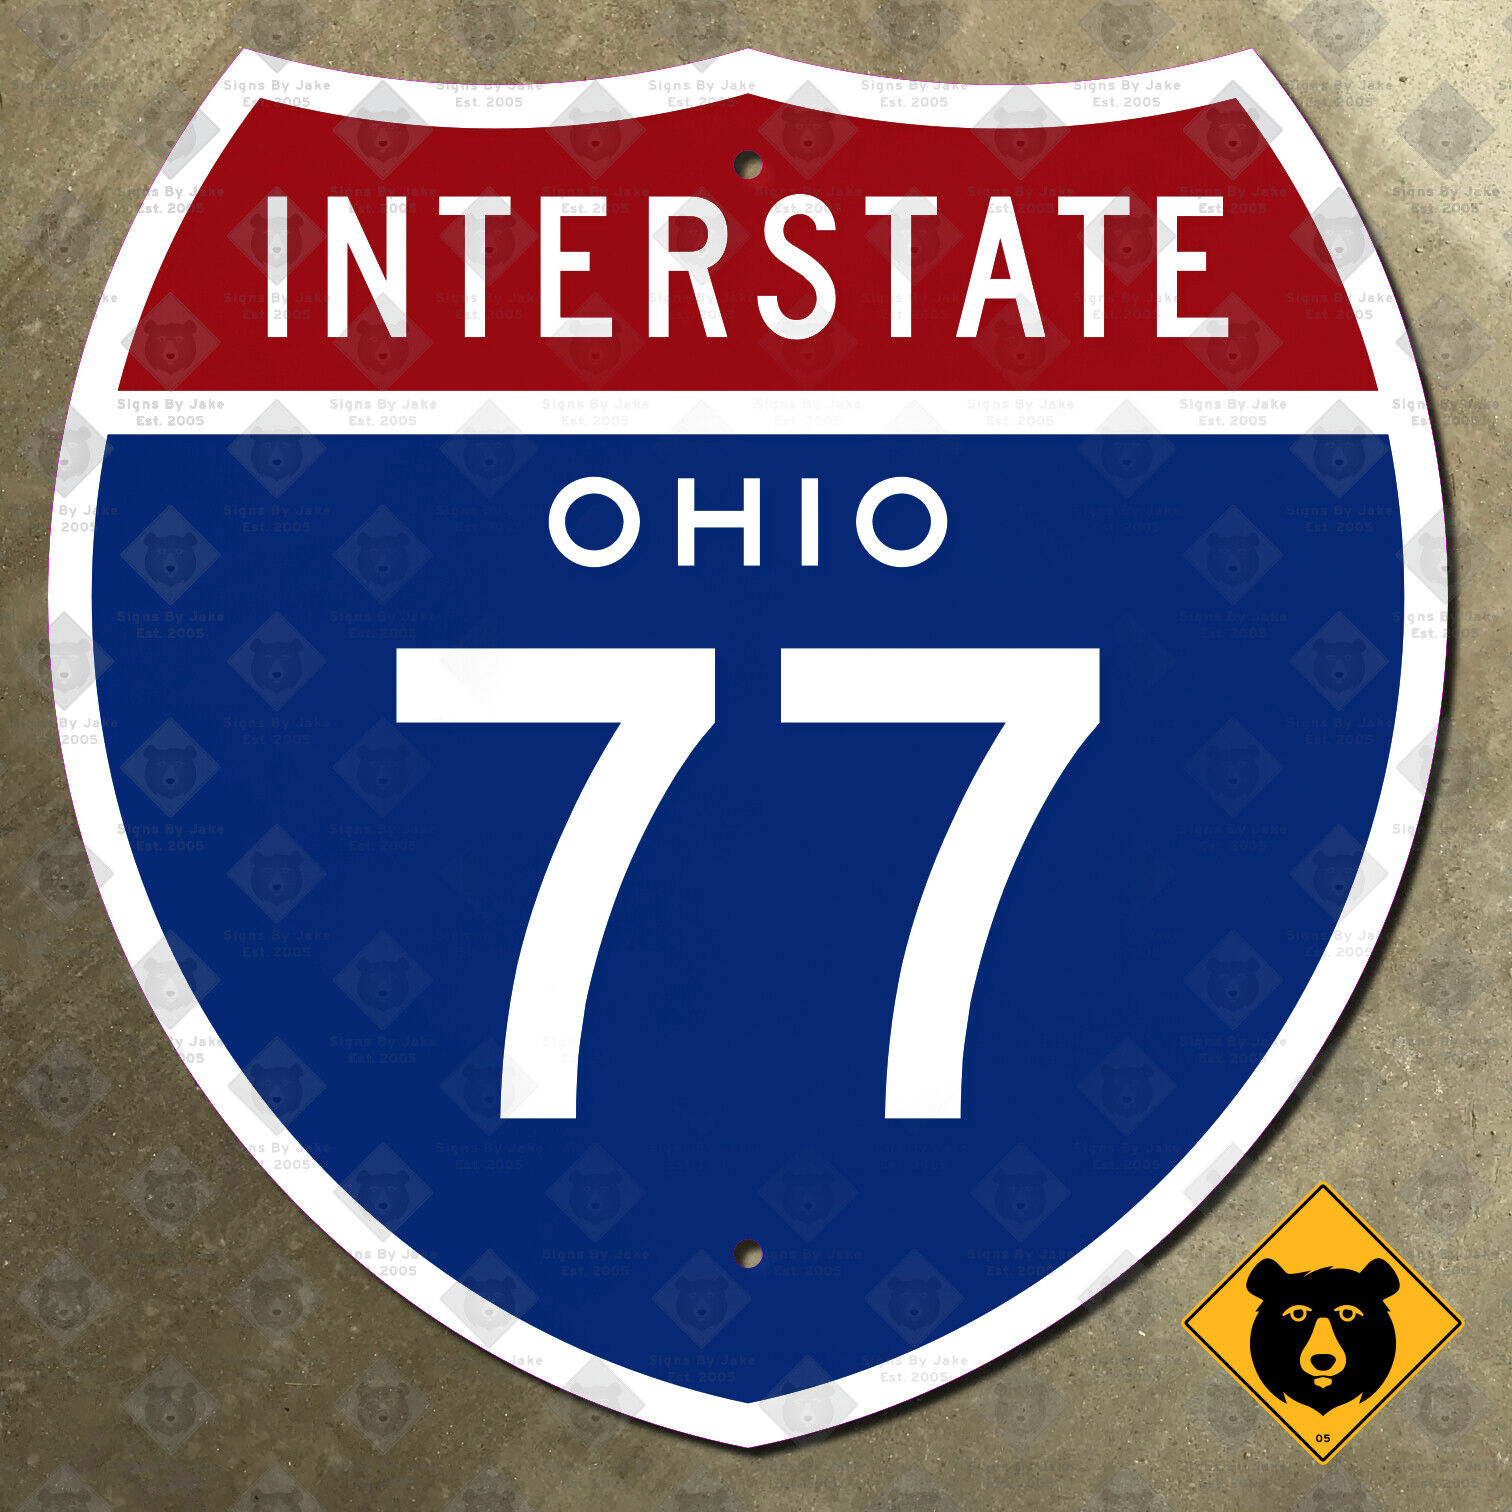 Ohio Interstate 77 highway route sign 1957 Cleveland Akron Canton 18x18